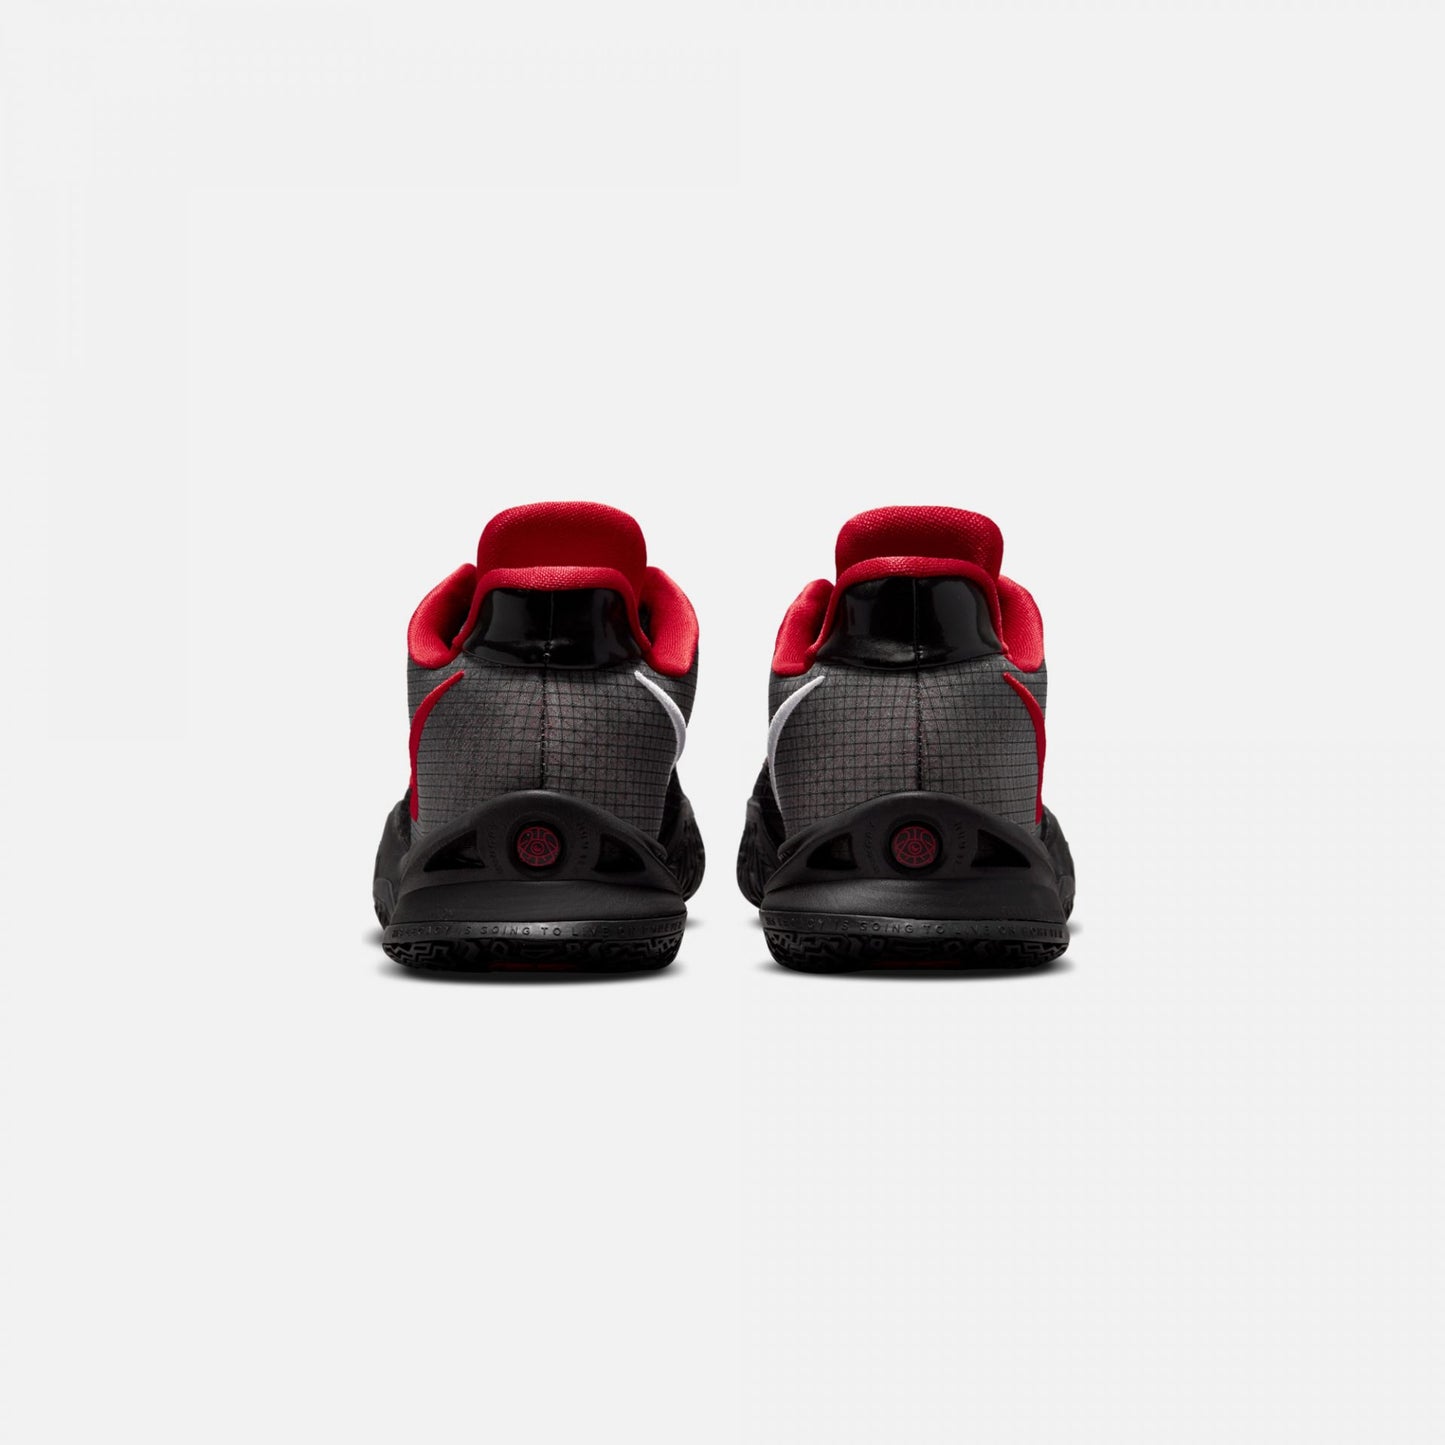 KYRIE LOW 4 EP BLACK/UNIVERSITY RED